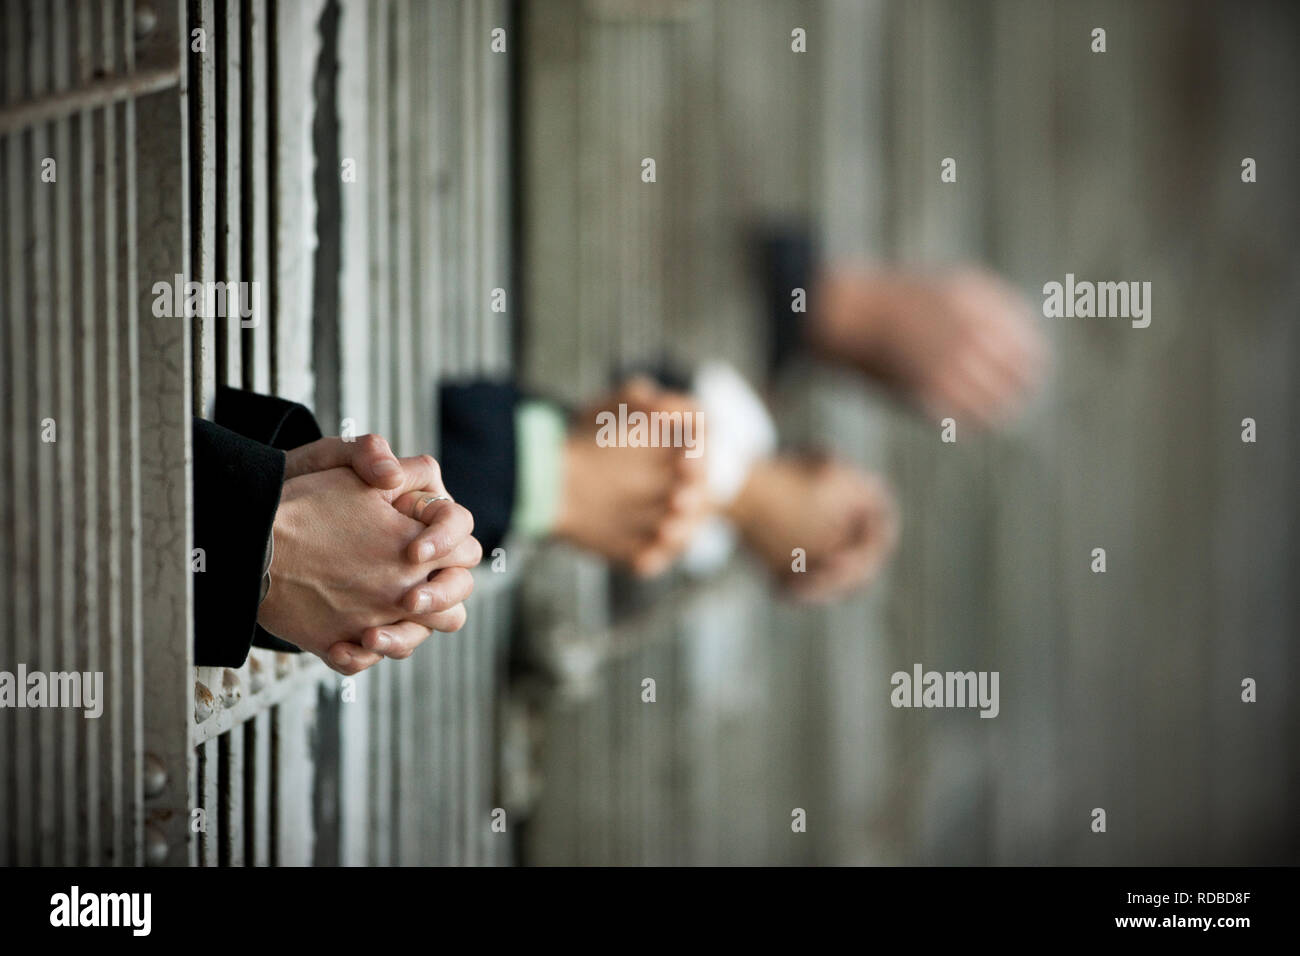 Hands of four businesspeople handing clasped in between the bars of a jail cell. Stock Photo